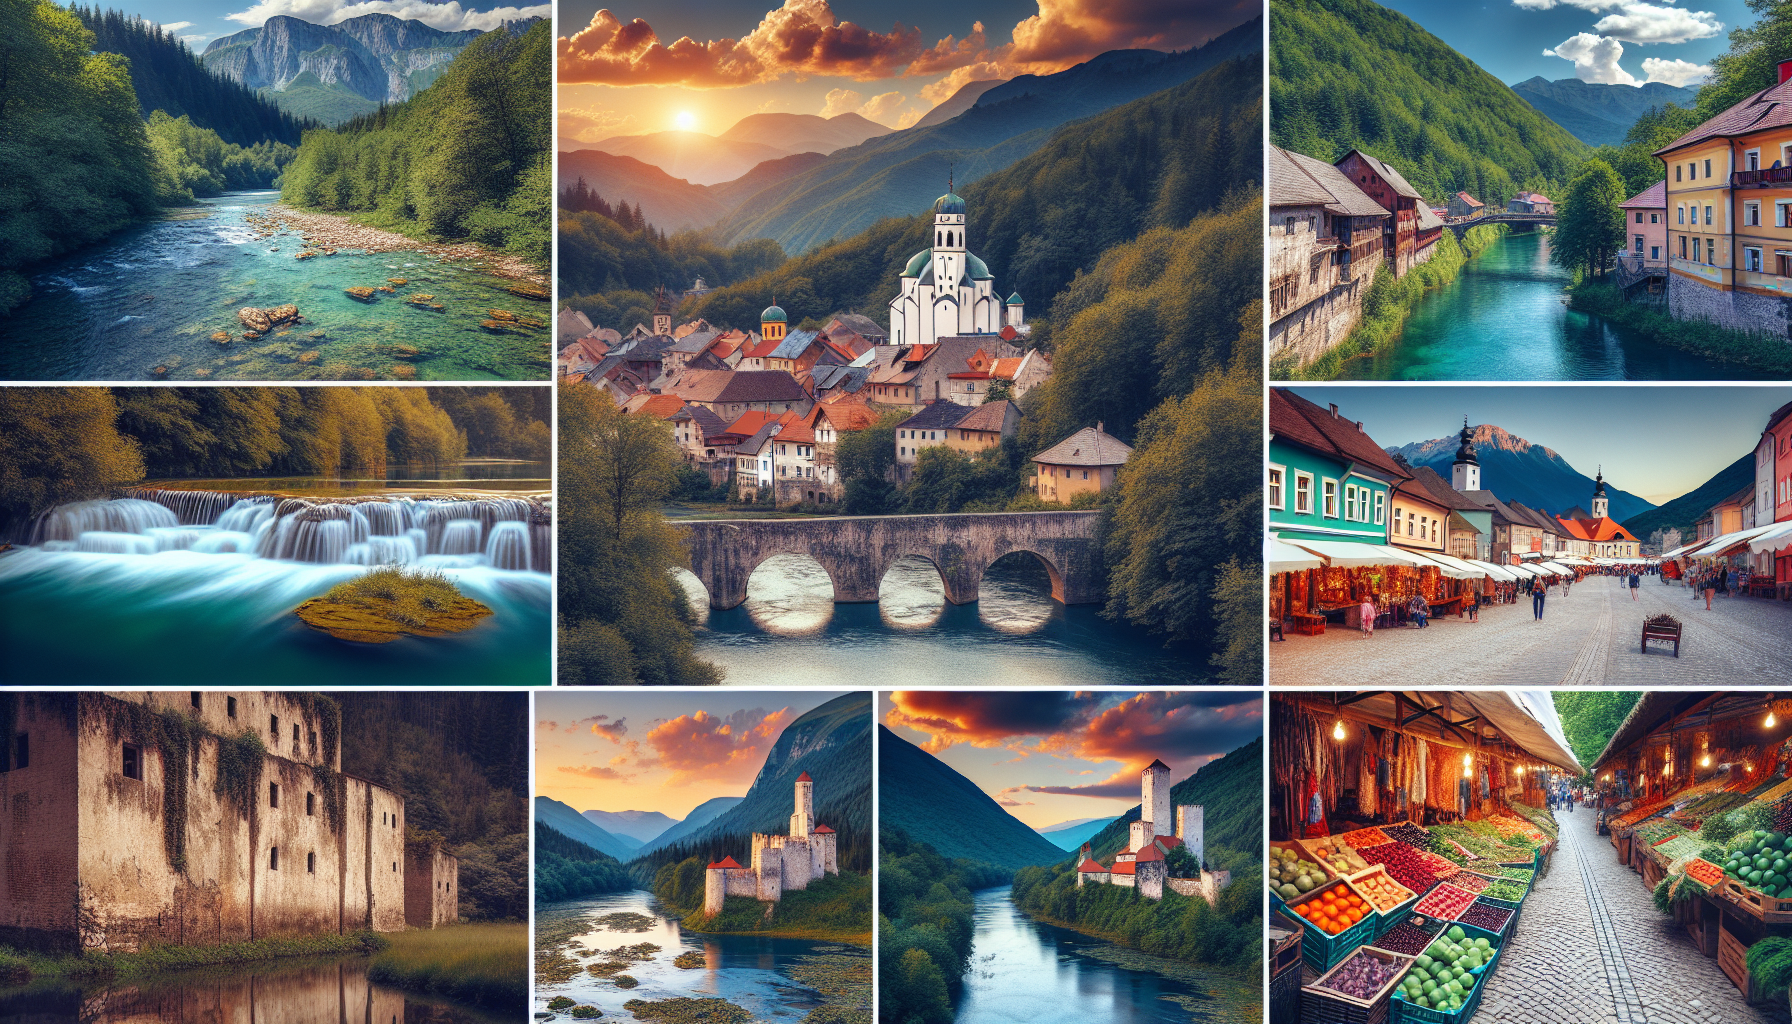 discover the best places to visit in europe and uncover the hidden gems of eastern europe with our expert guide. explore unique destinations and unforgettable experiences off the beaten path.